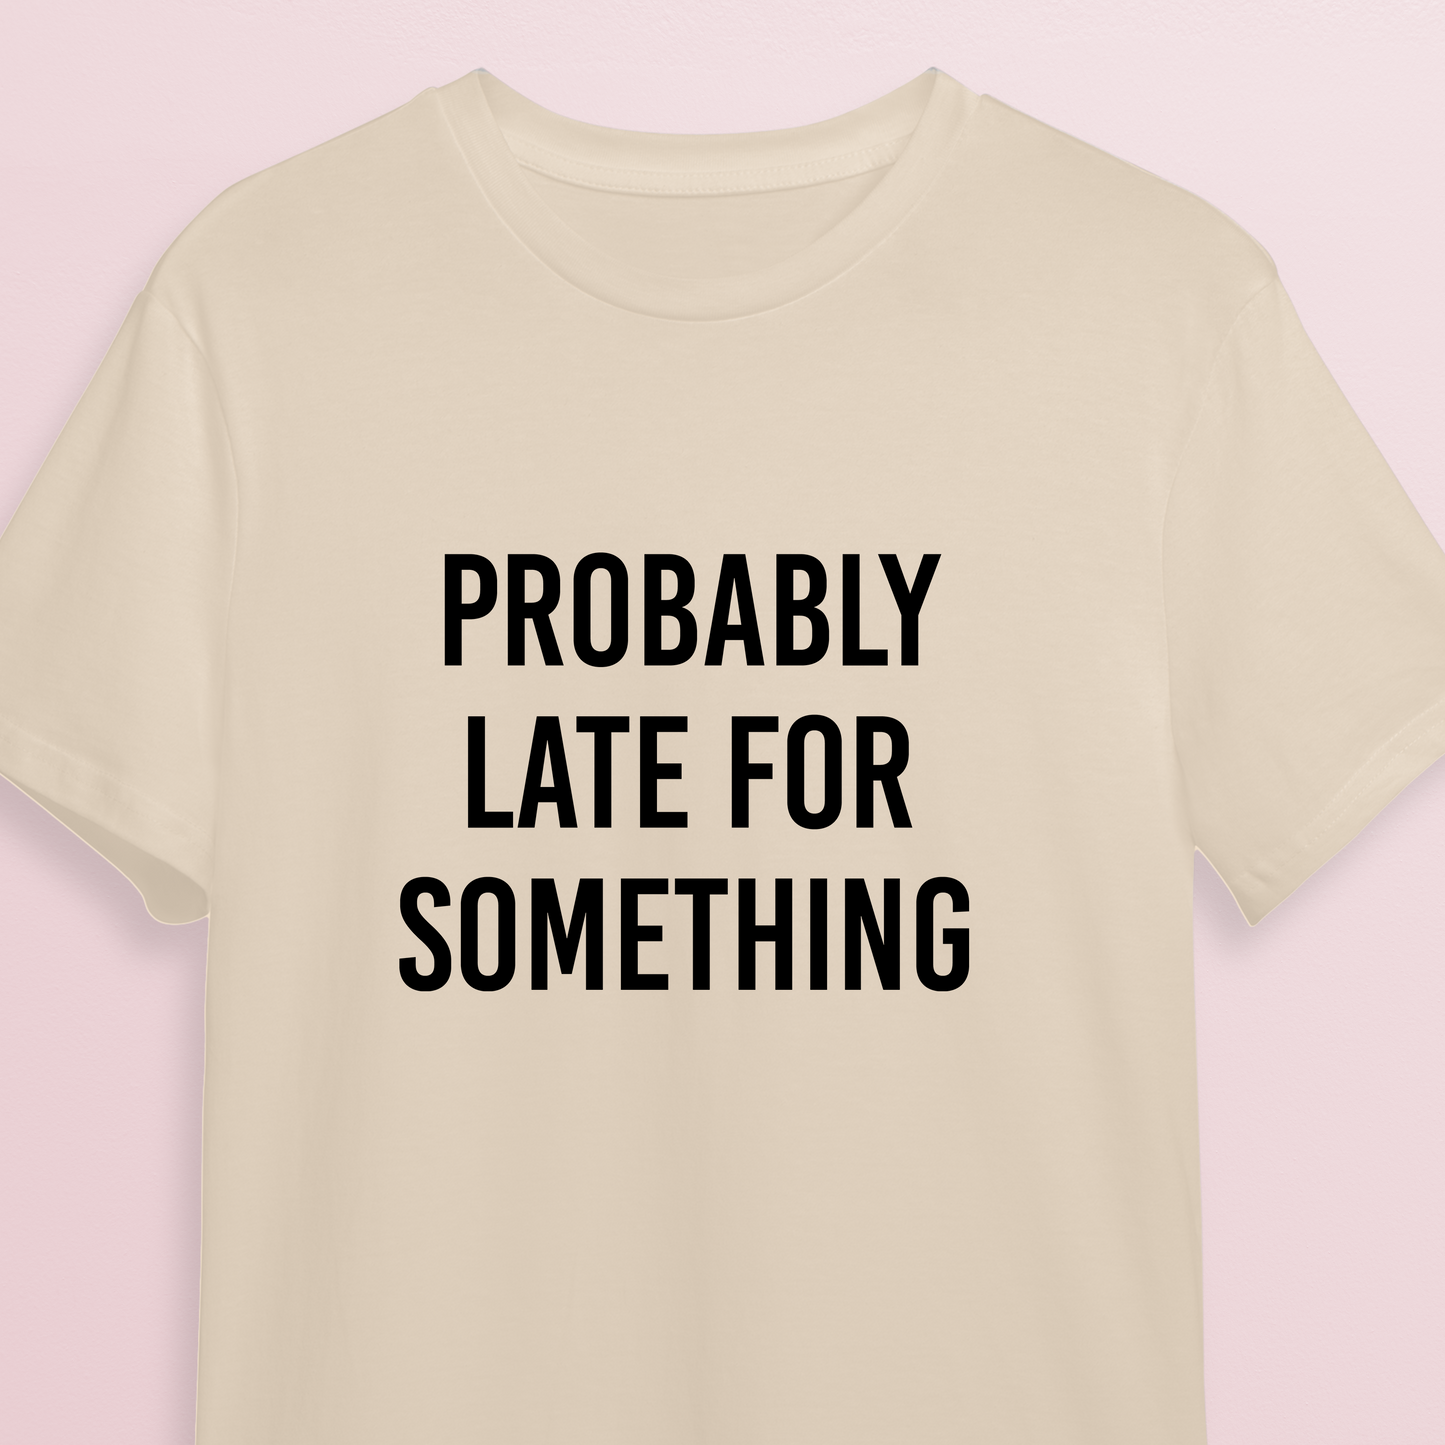 T-shirt - Probably late - Off white